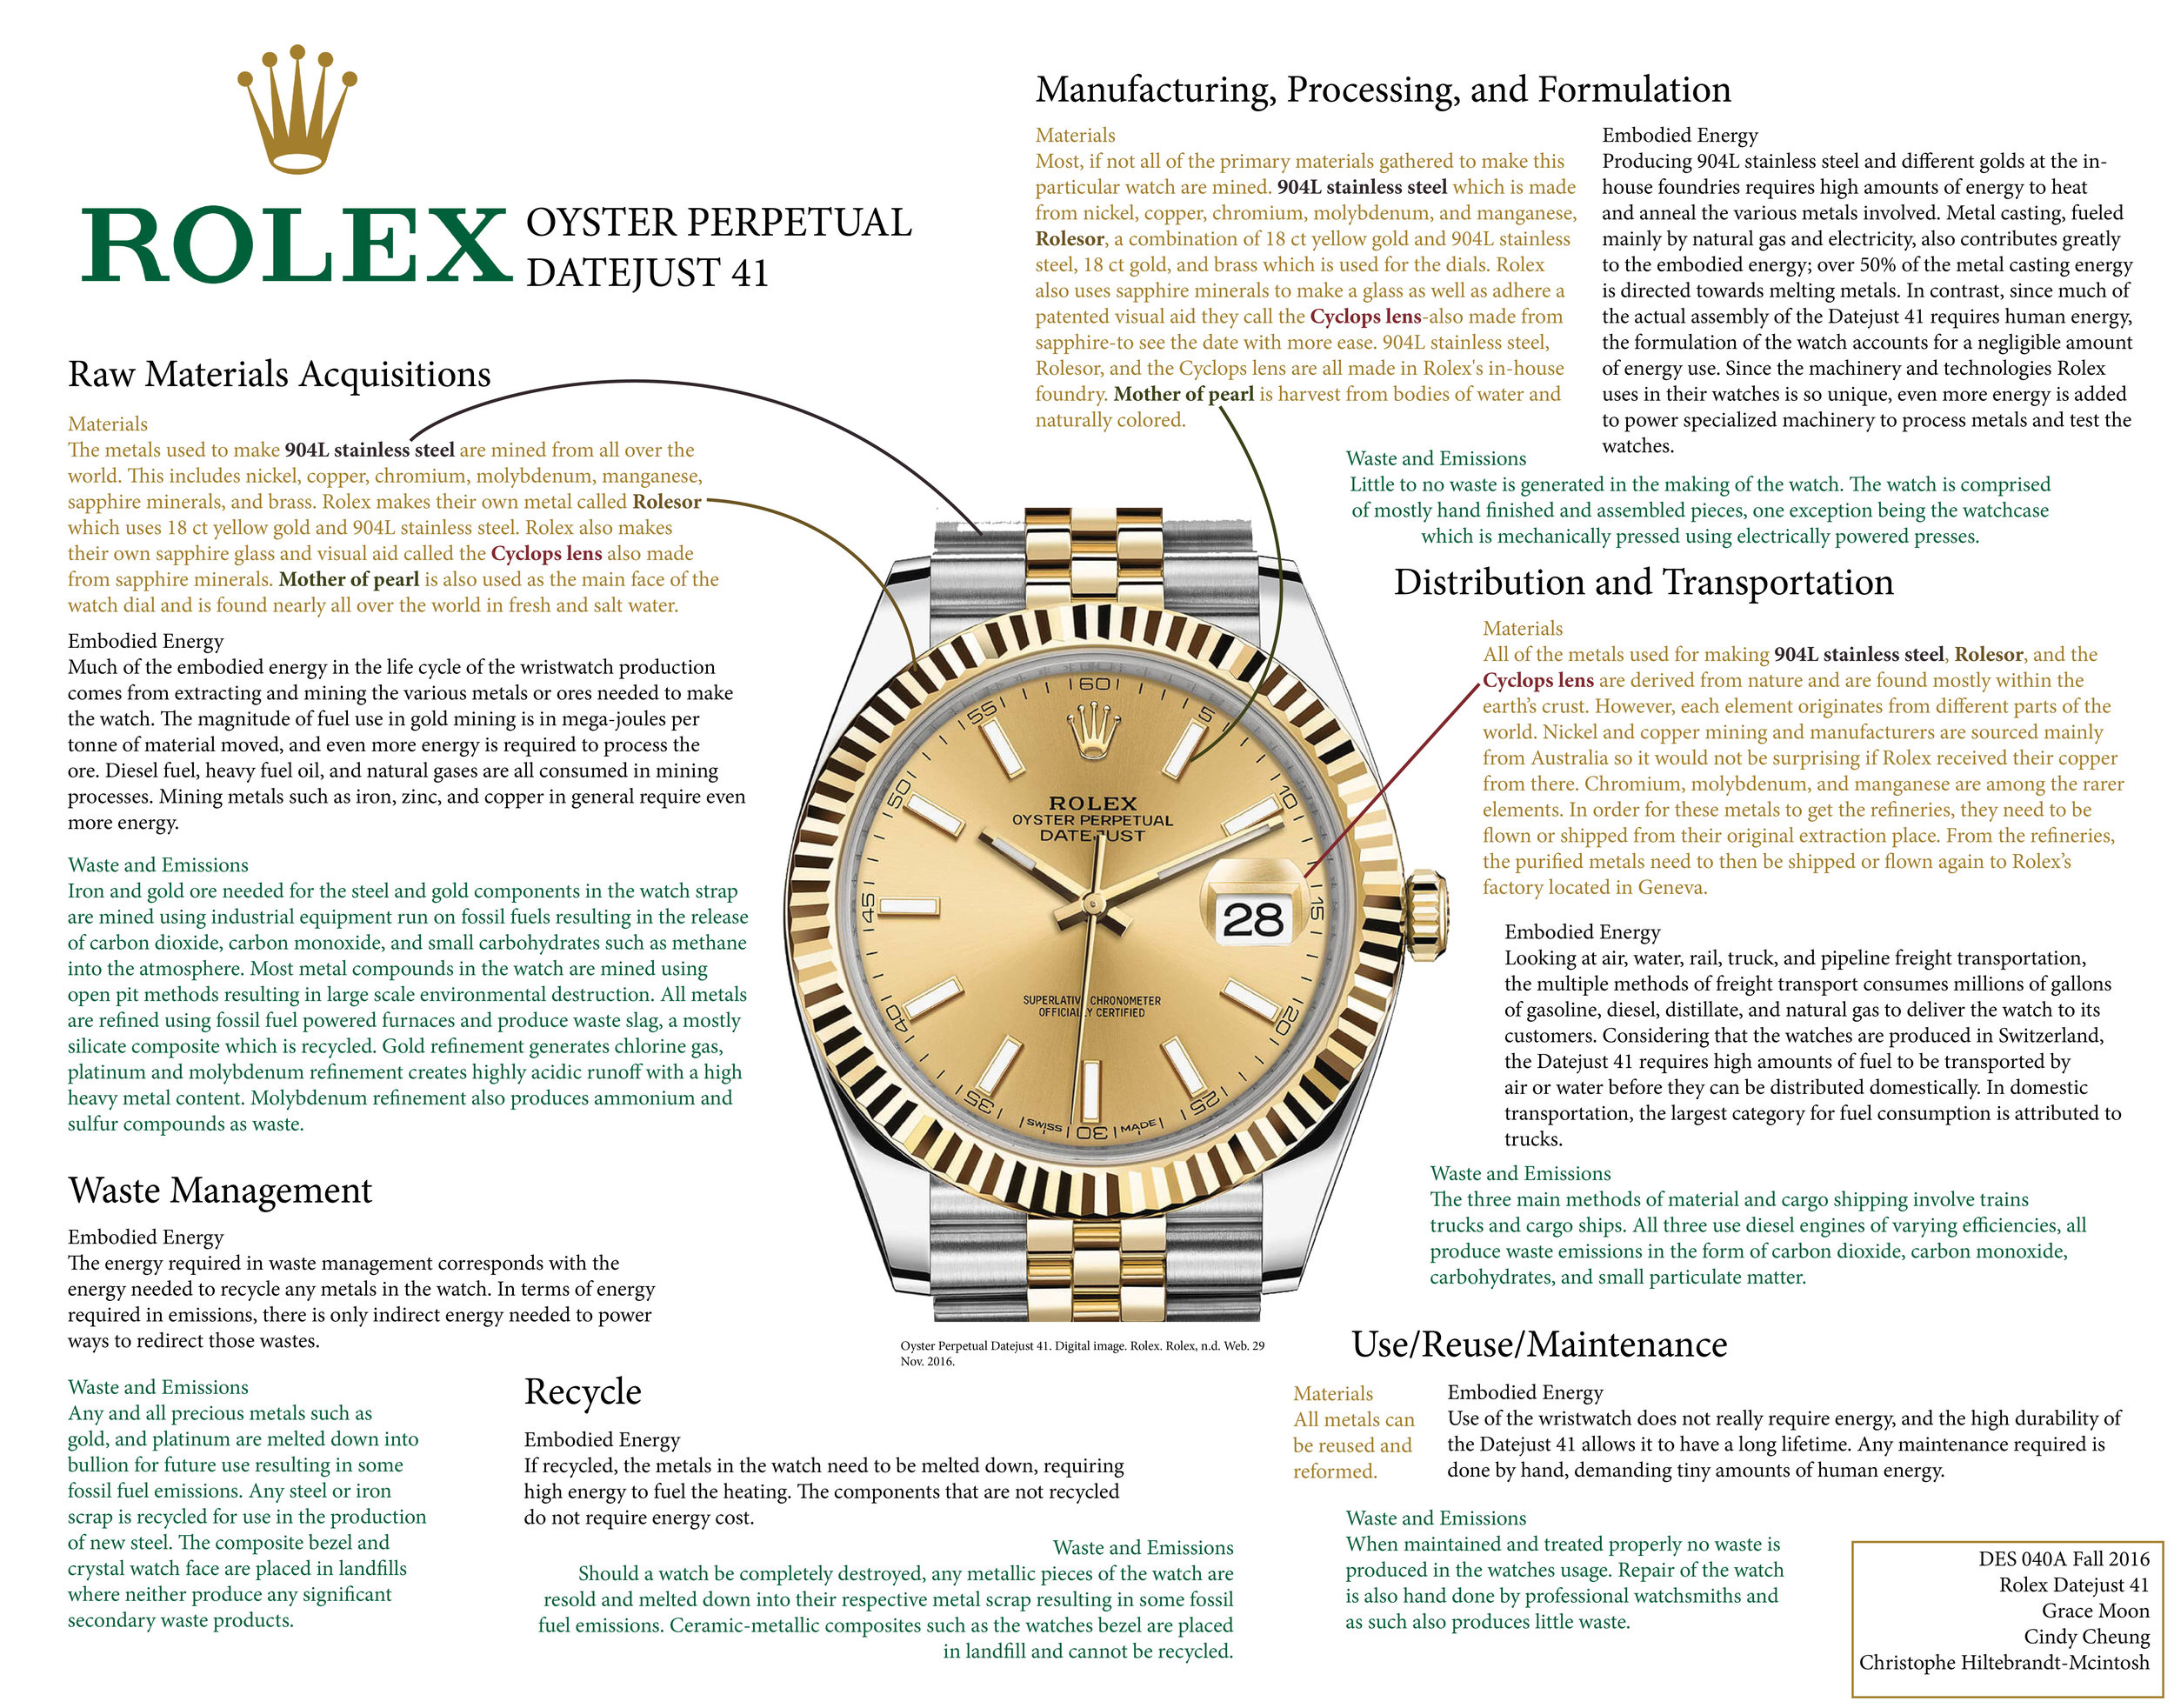 Rolex Datejust 41 Watch — Design Life-Cycle